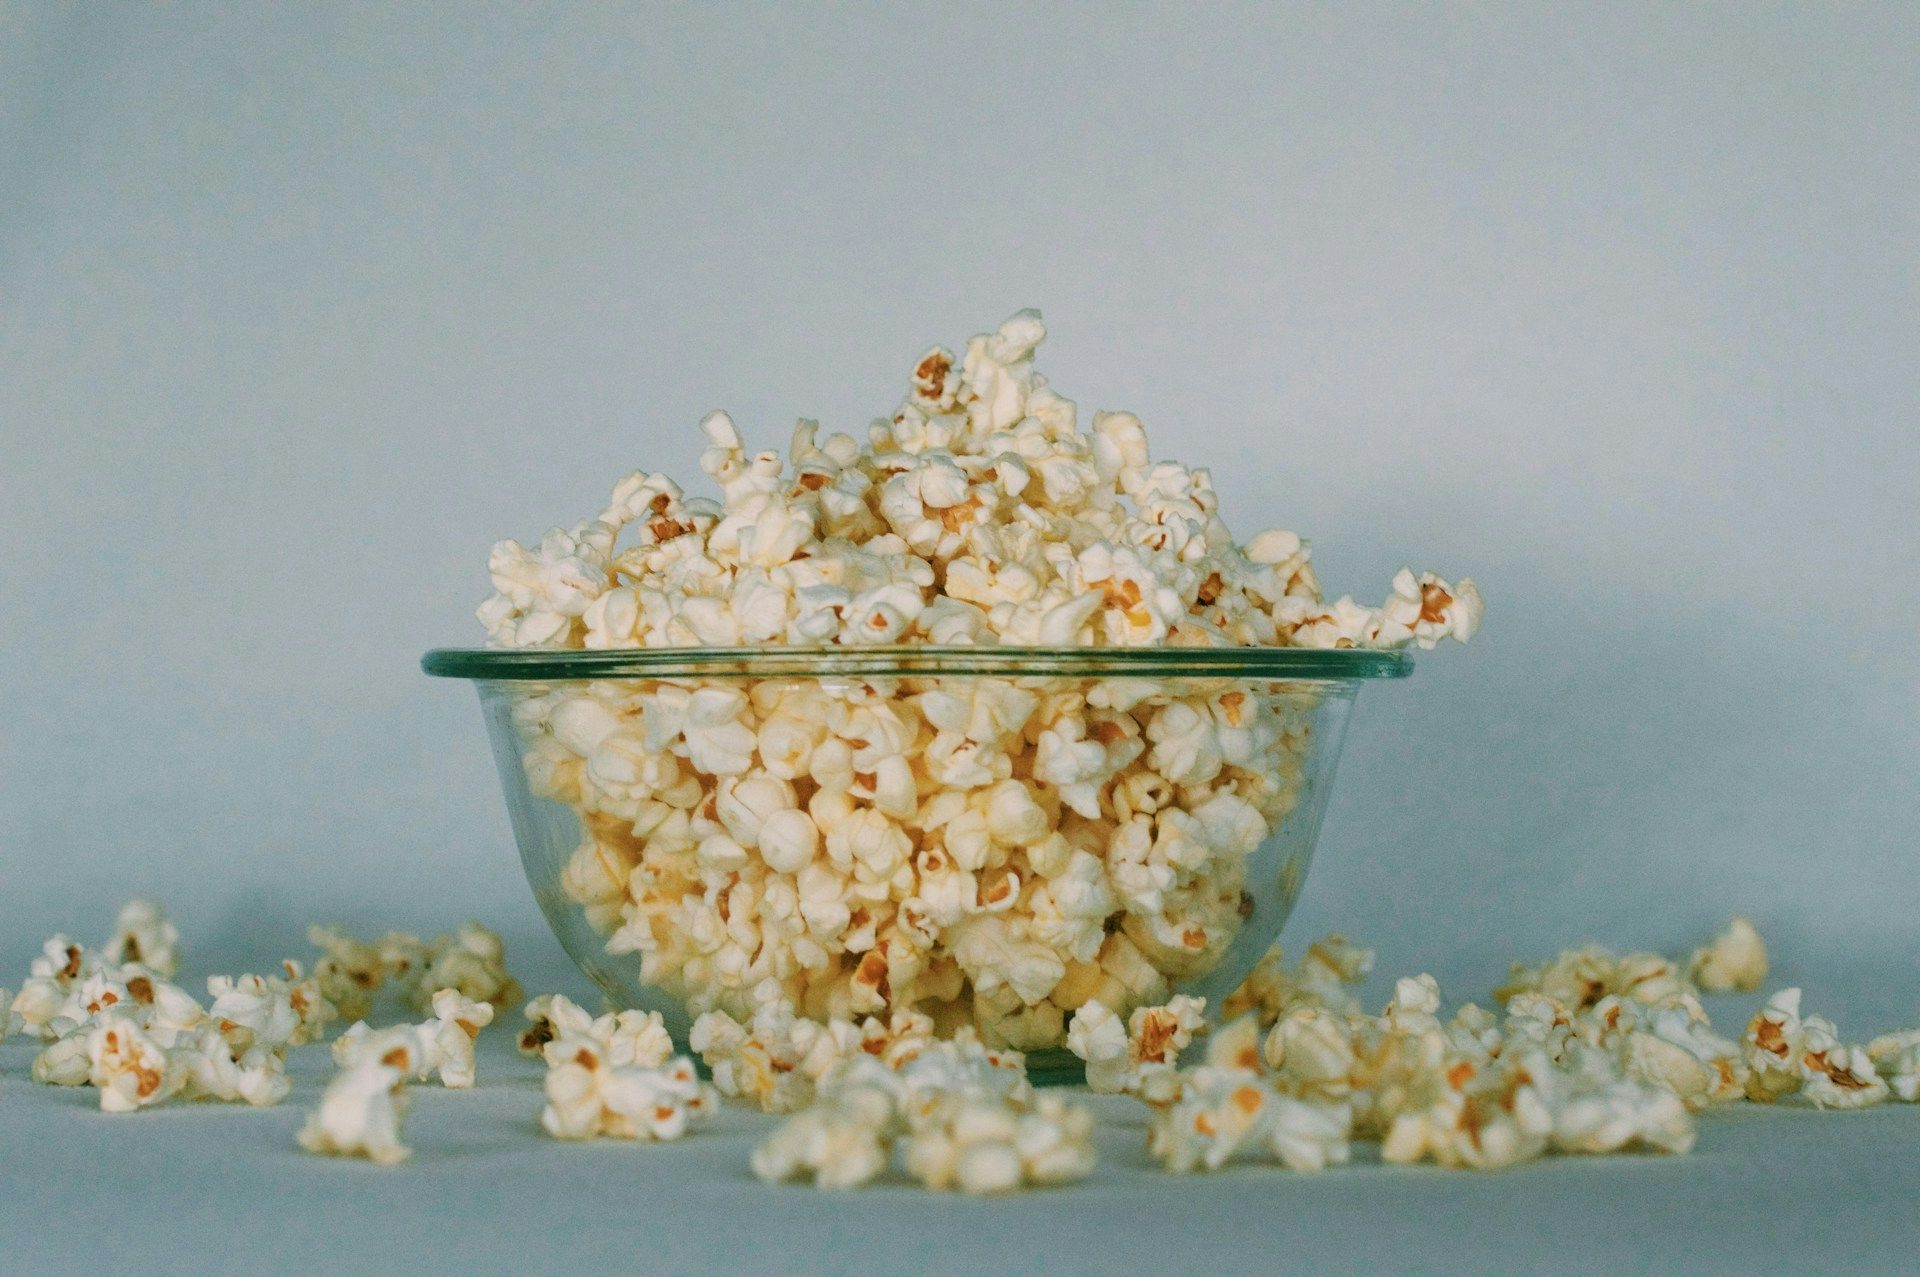 Tell us about your favourite movie snacks for $1